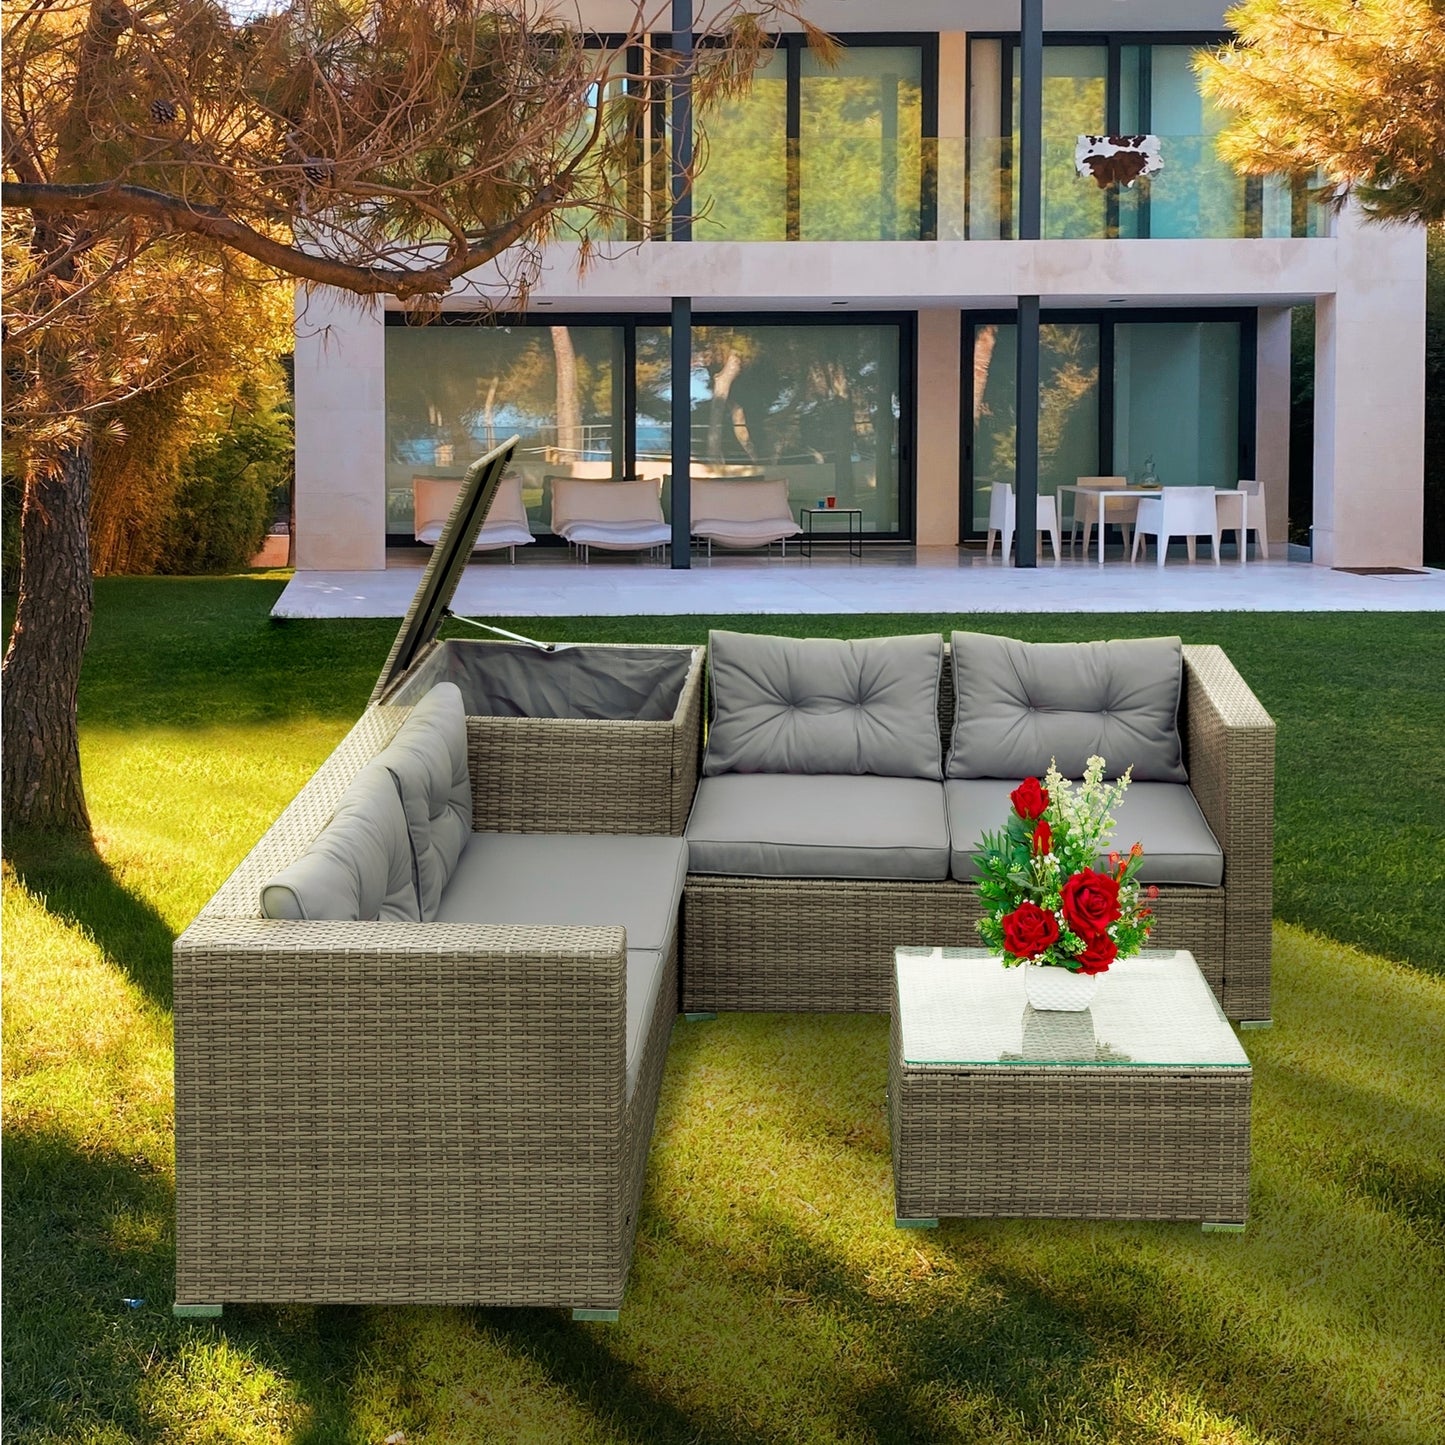 4 Piece Outdoor Sectional